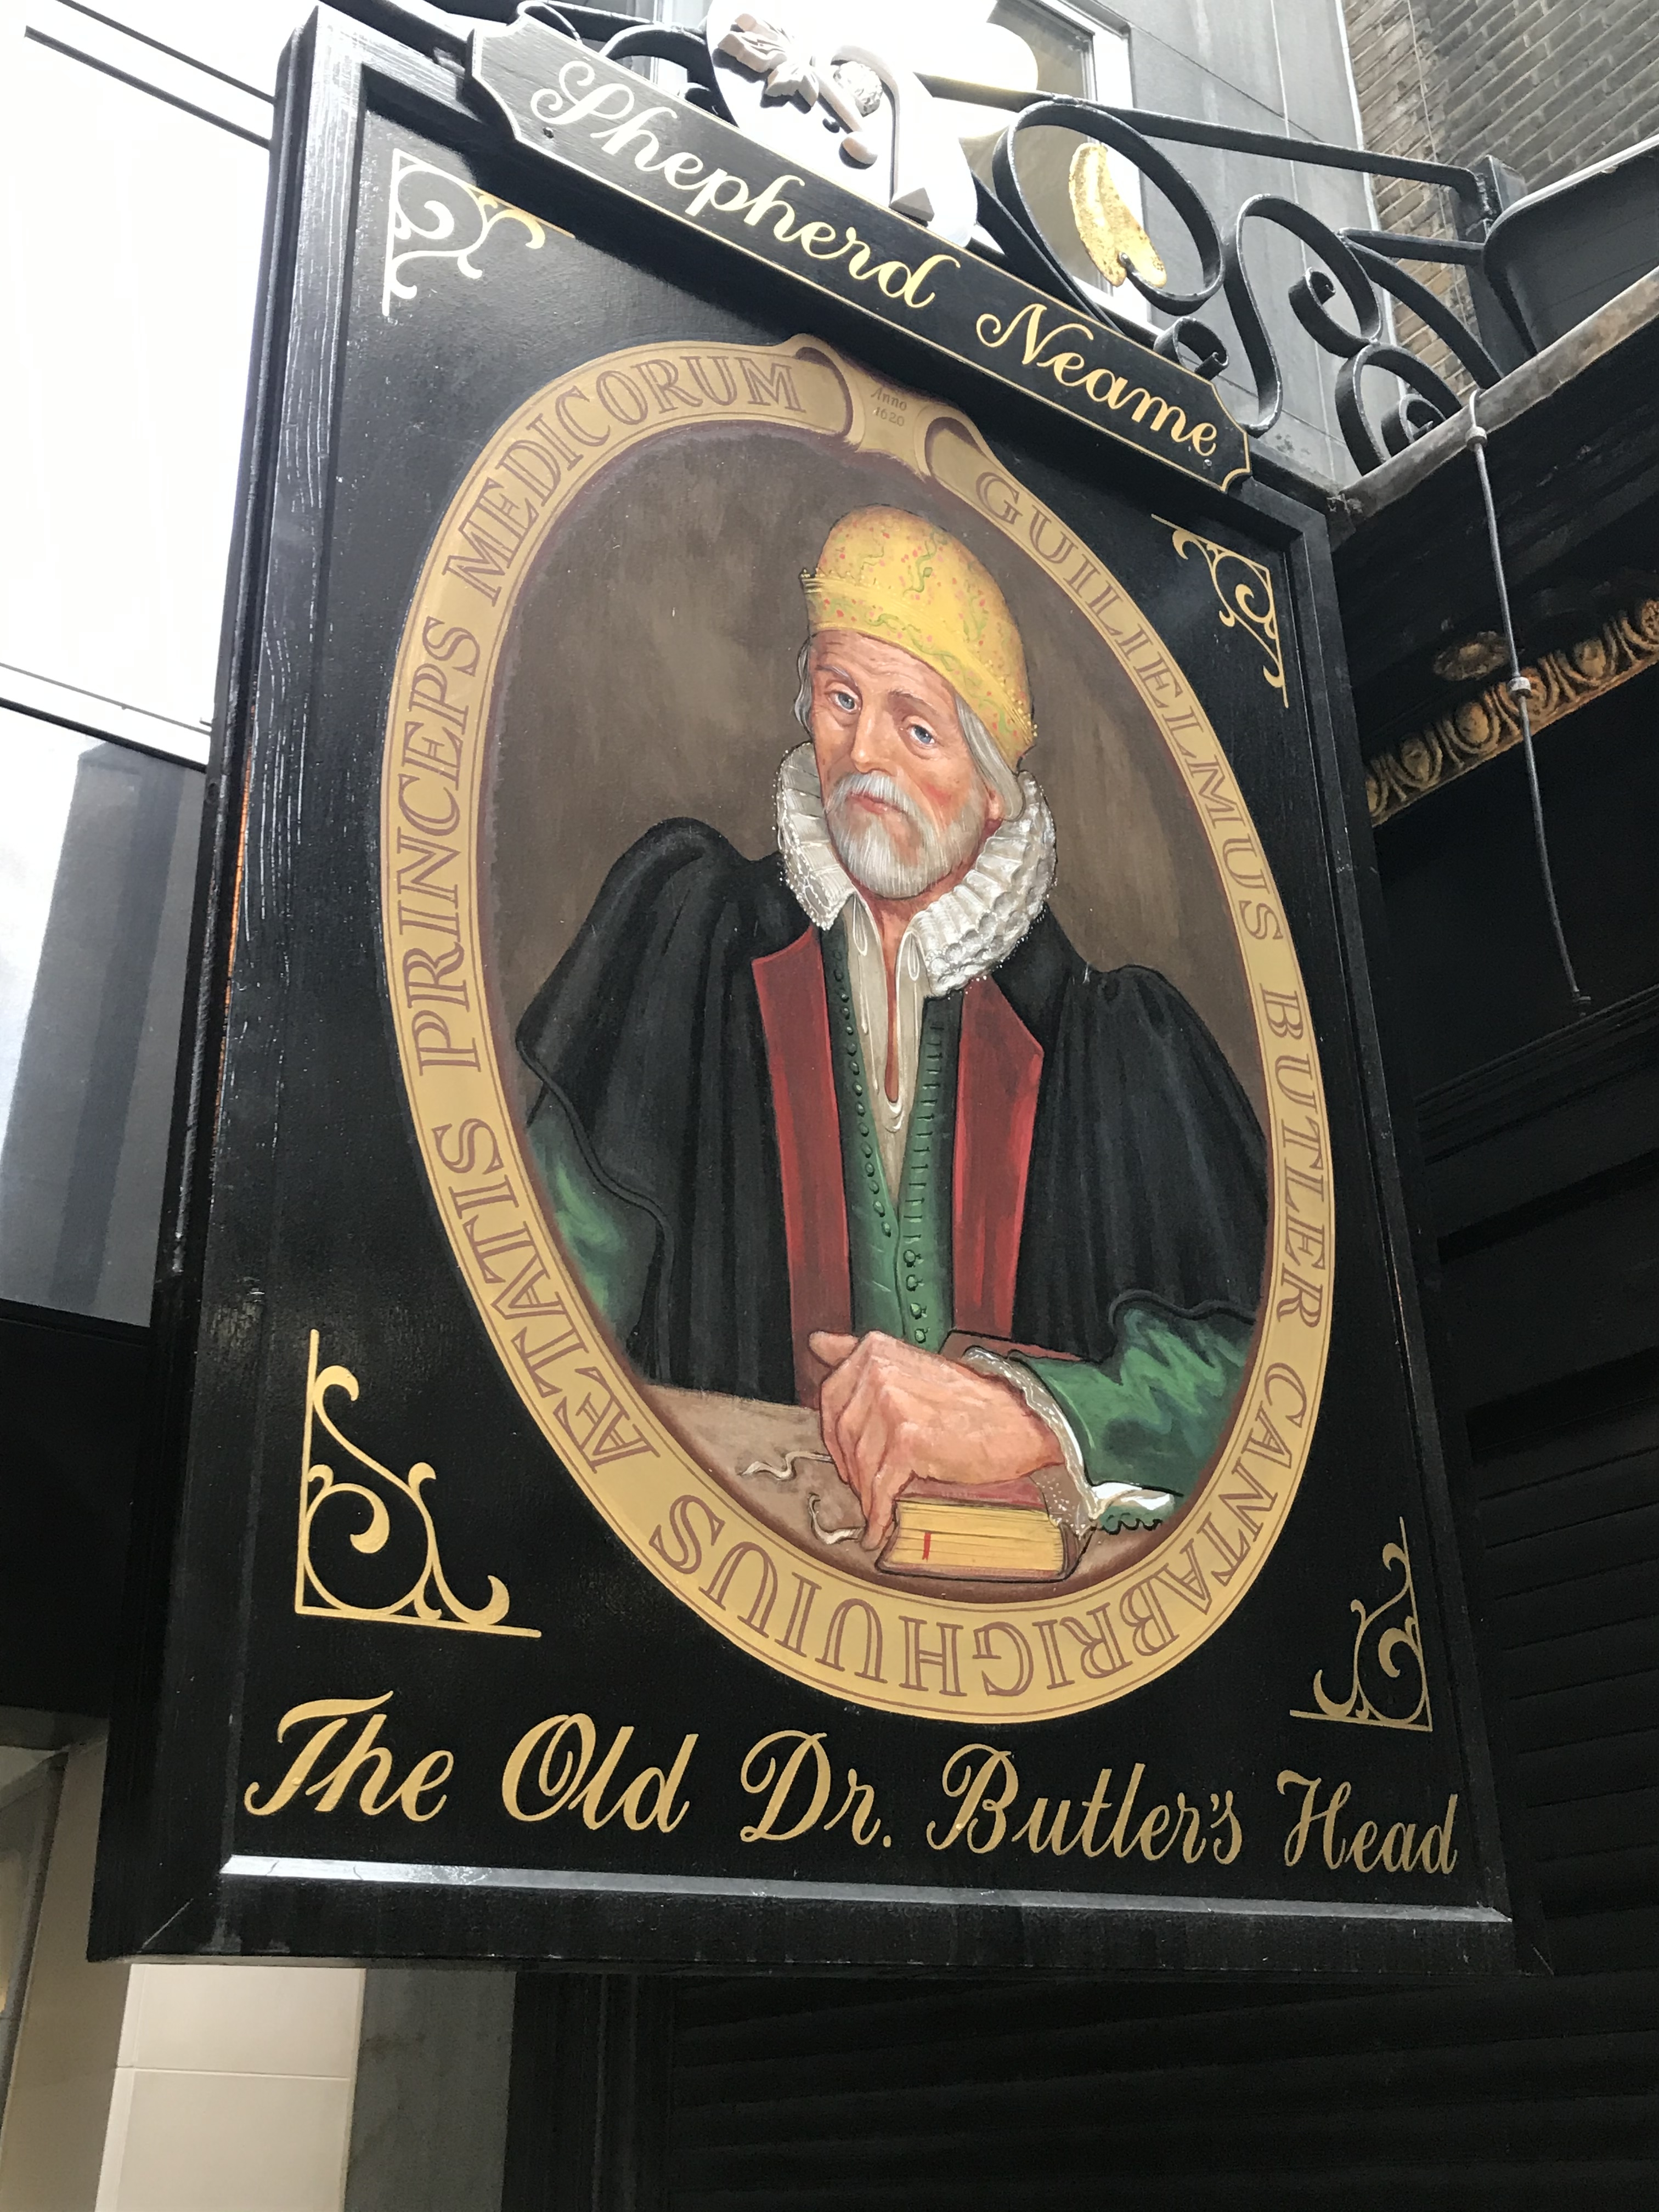 One of London’s most historic pubs, The Old Doctor Butler’s Head in Moorgate was named for the court physician to King James I and dates back to 1610. Image courtesy of LiquidHistory.com